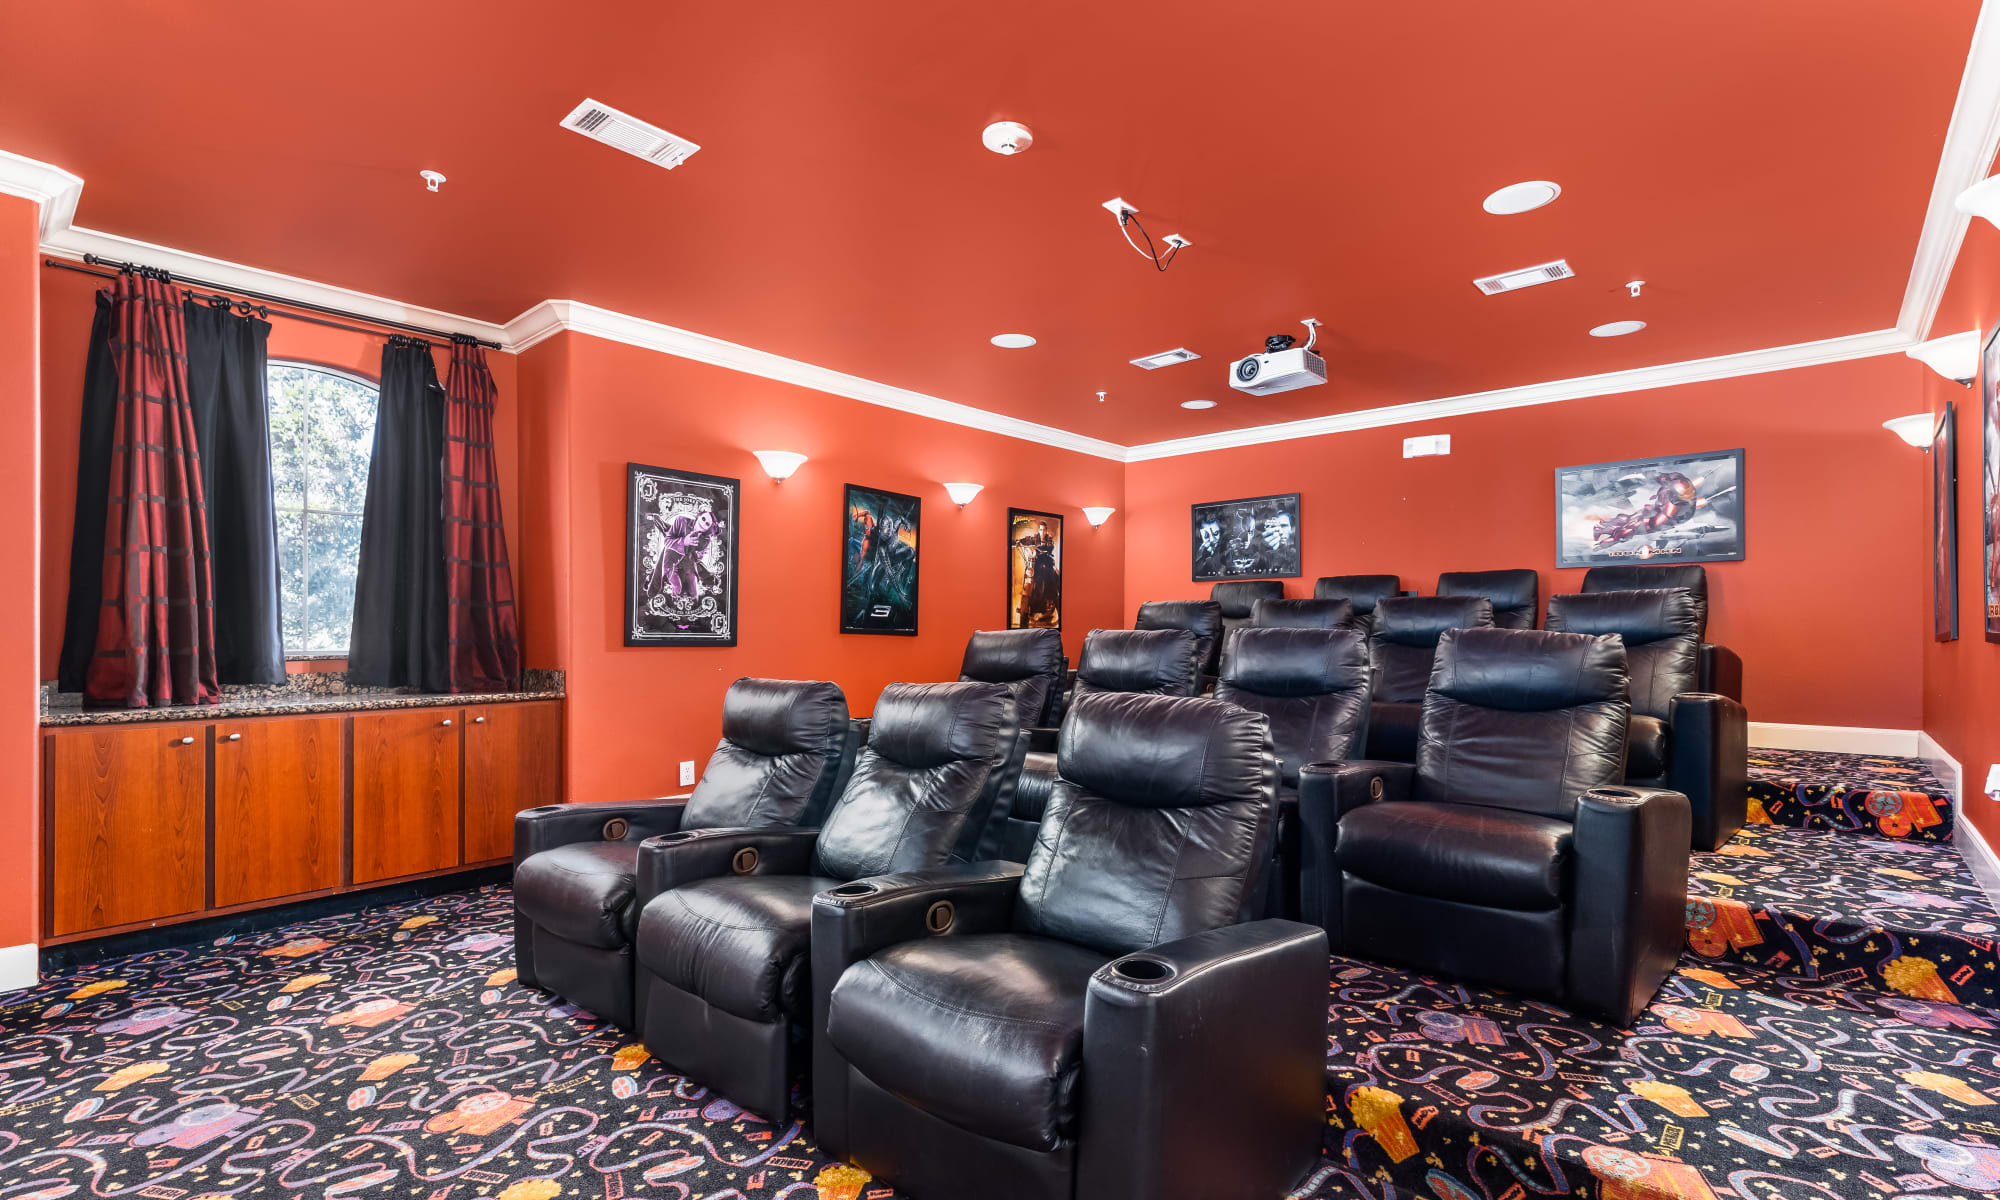 Enjoy apartments with a resident movie theater room at The Abbey at Grande Oaks in San Antonio, Texas